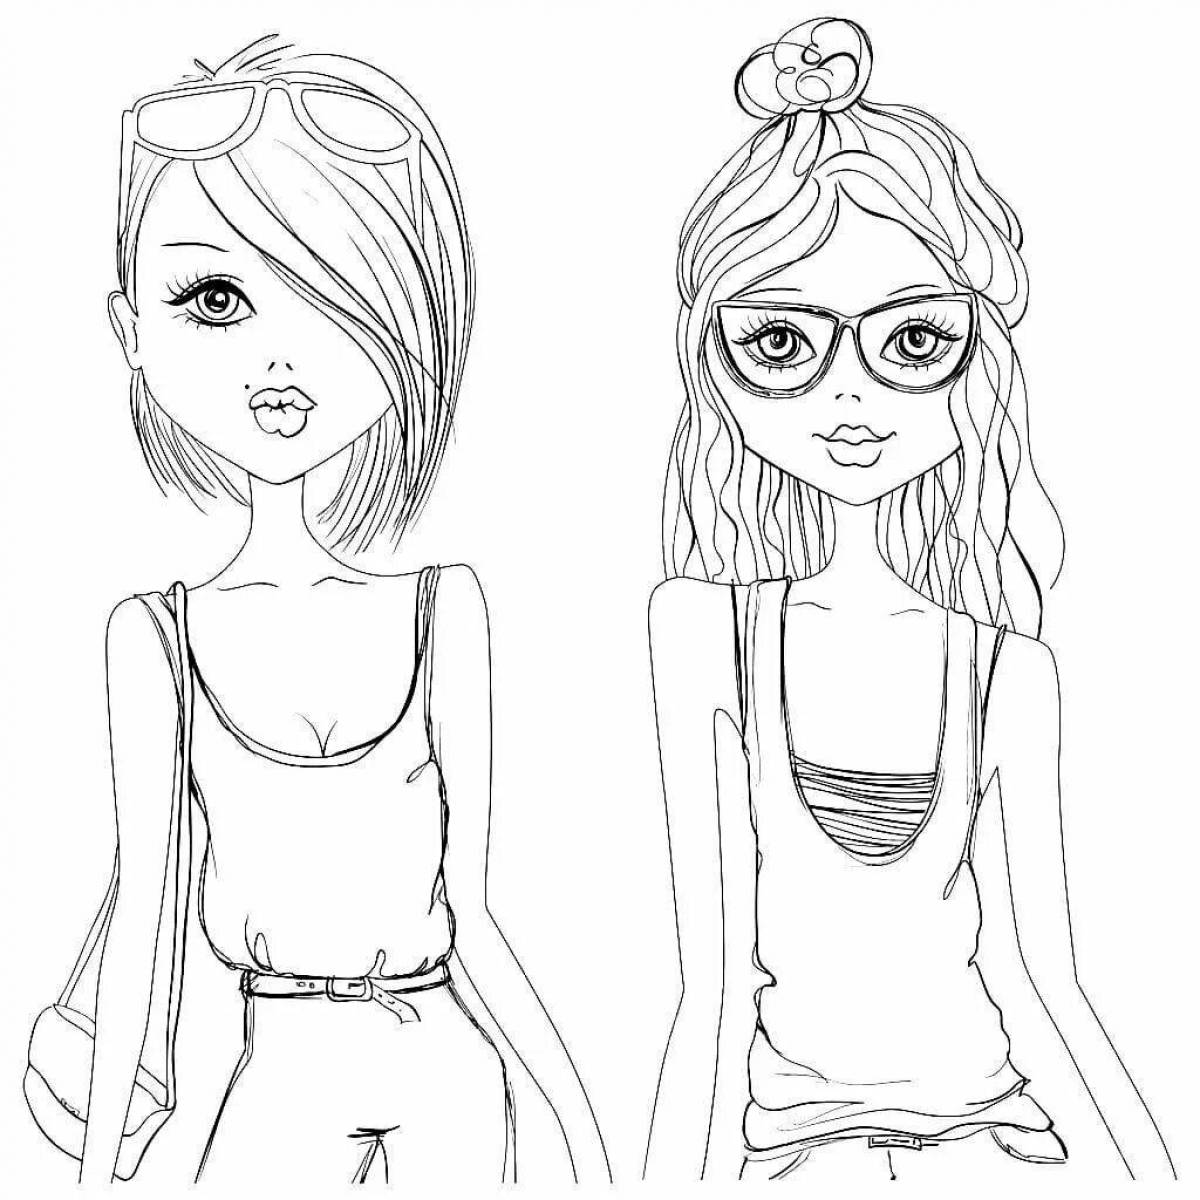 Adorable fashionista cheek battle coloring page